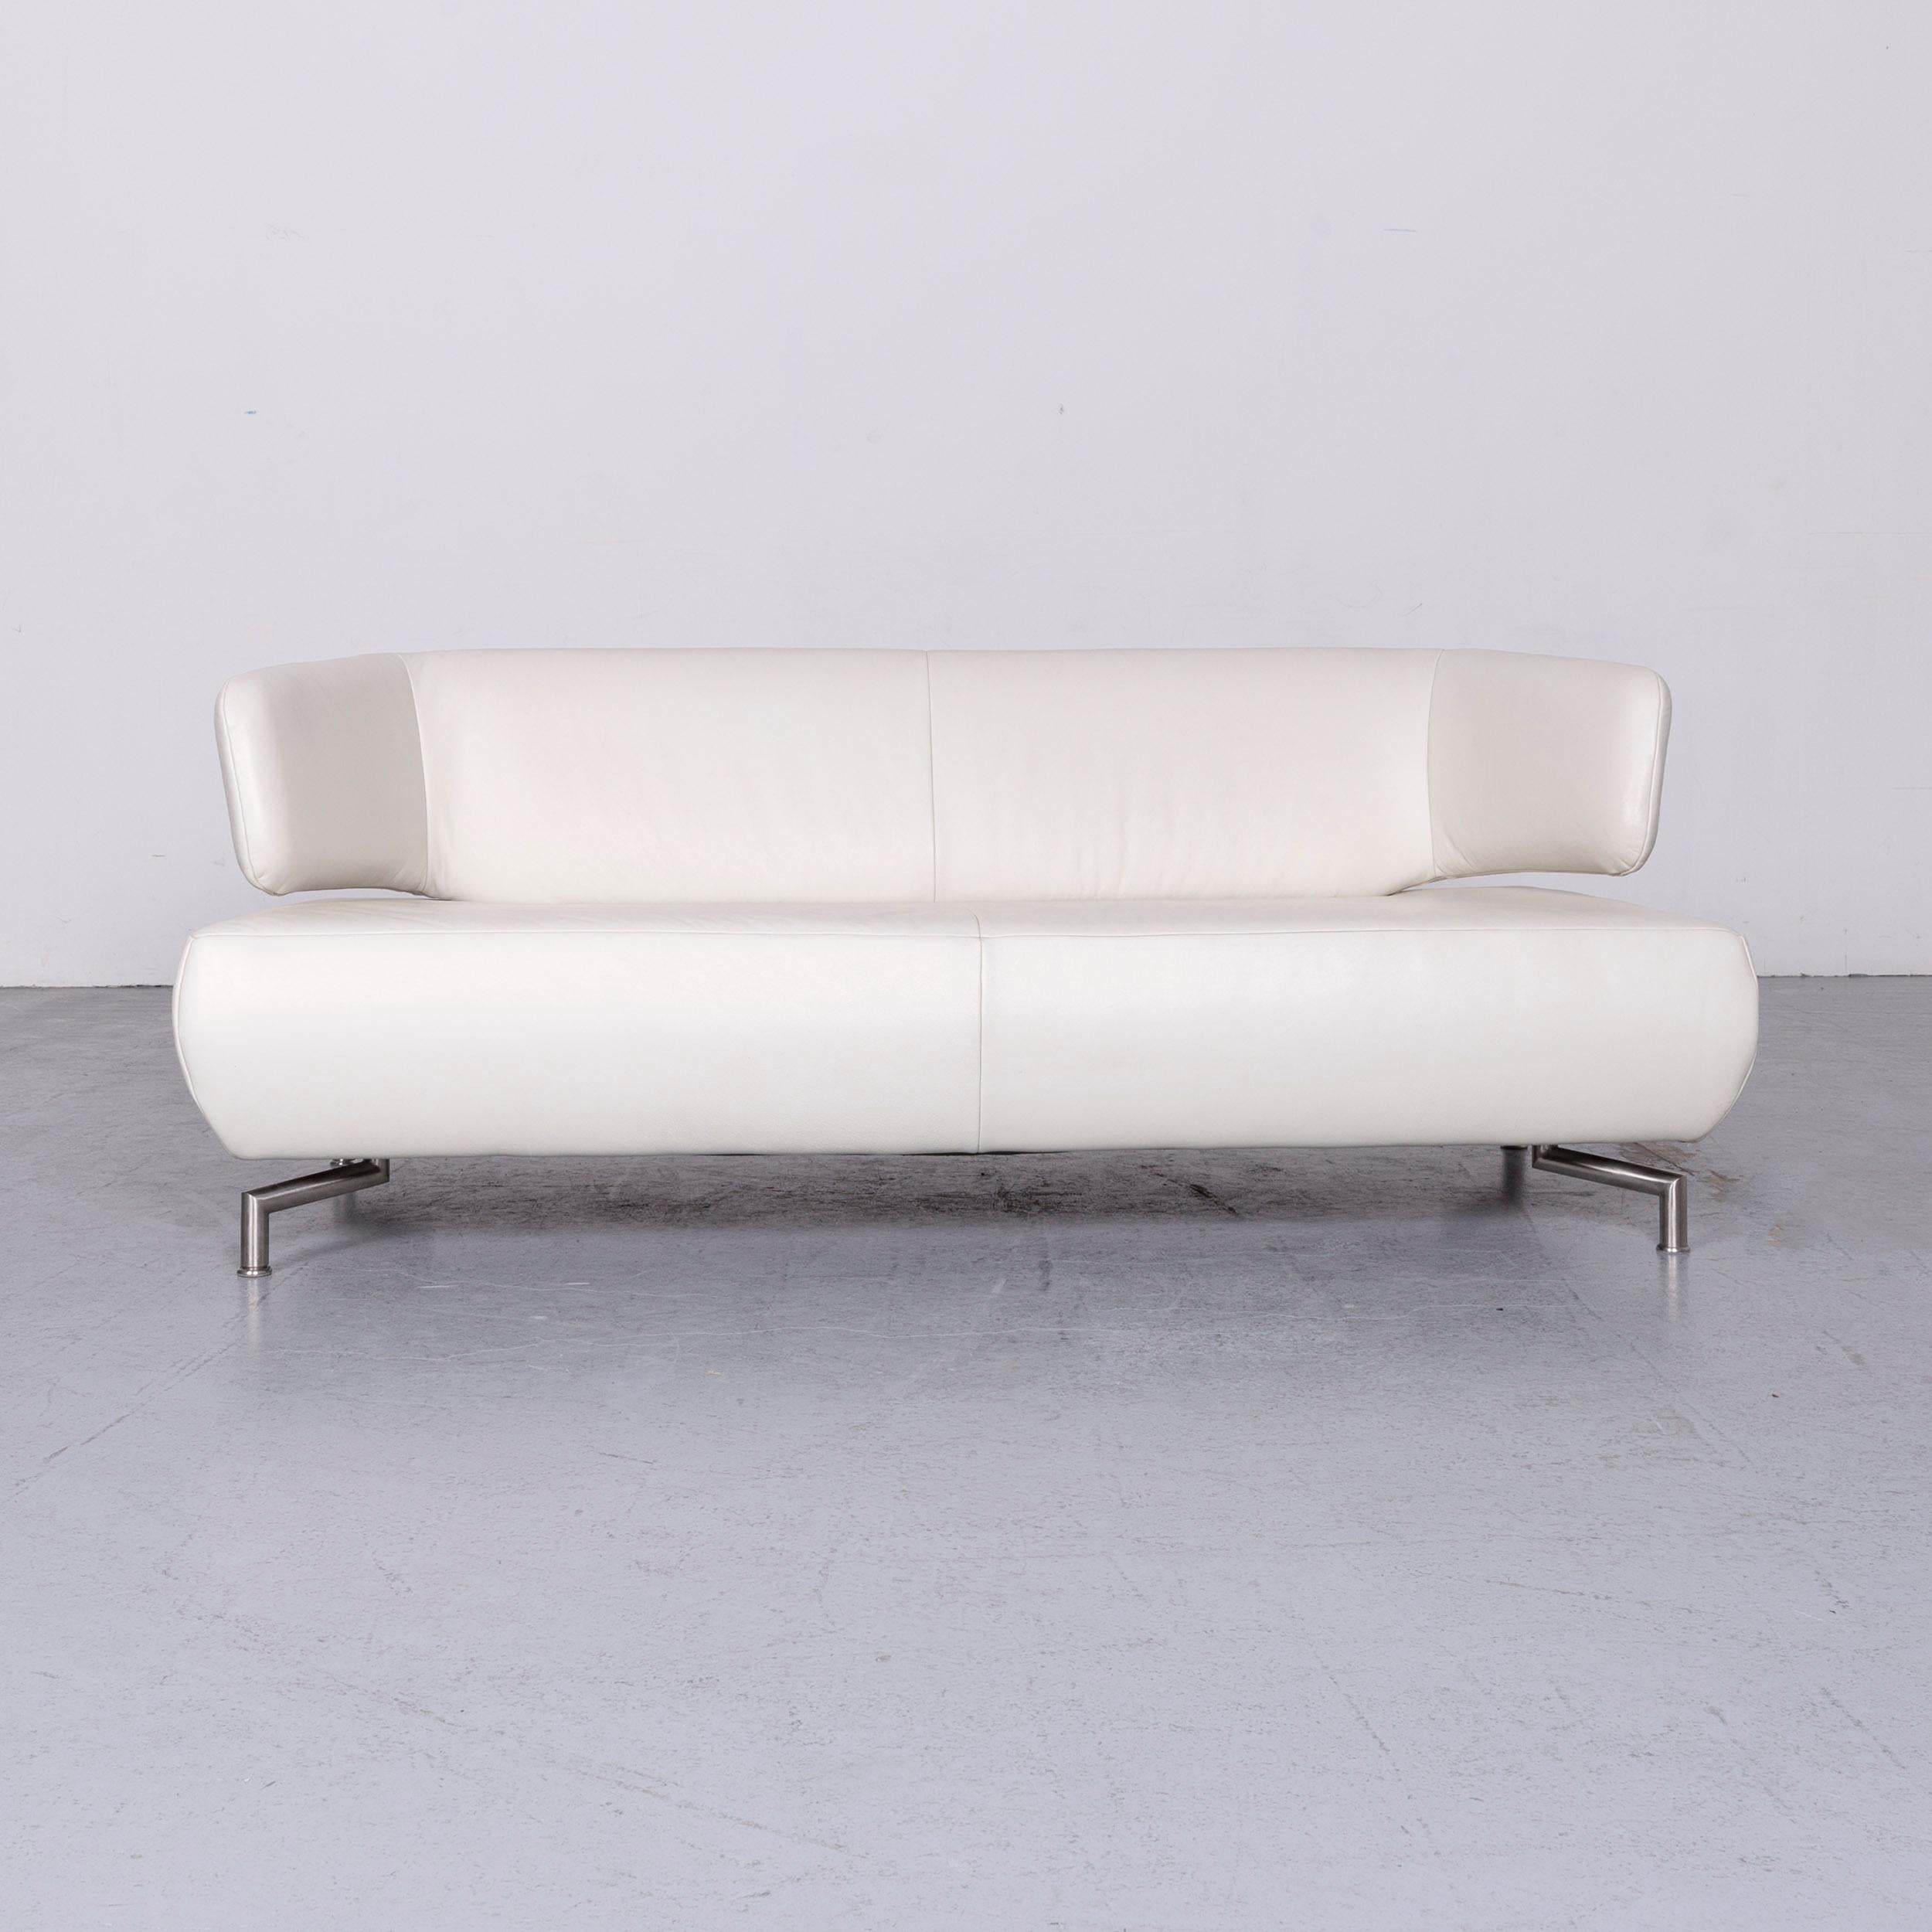 German Koinor Designer Two-Seat Sofa White Leather Couch with Pillow